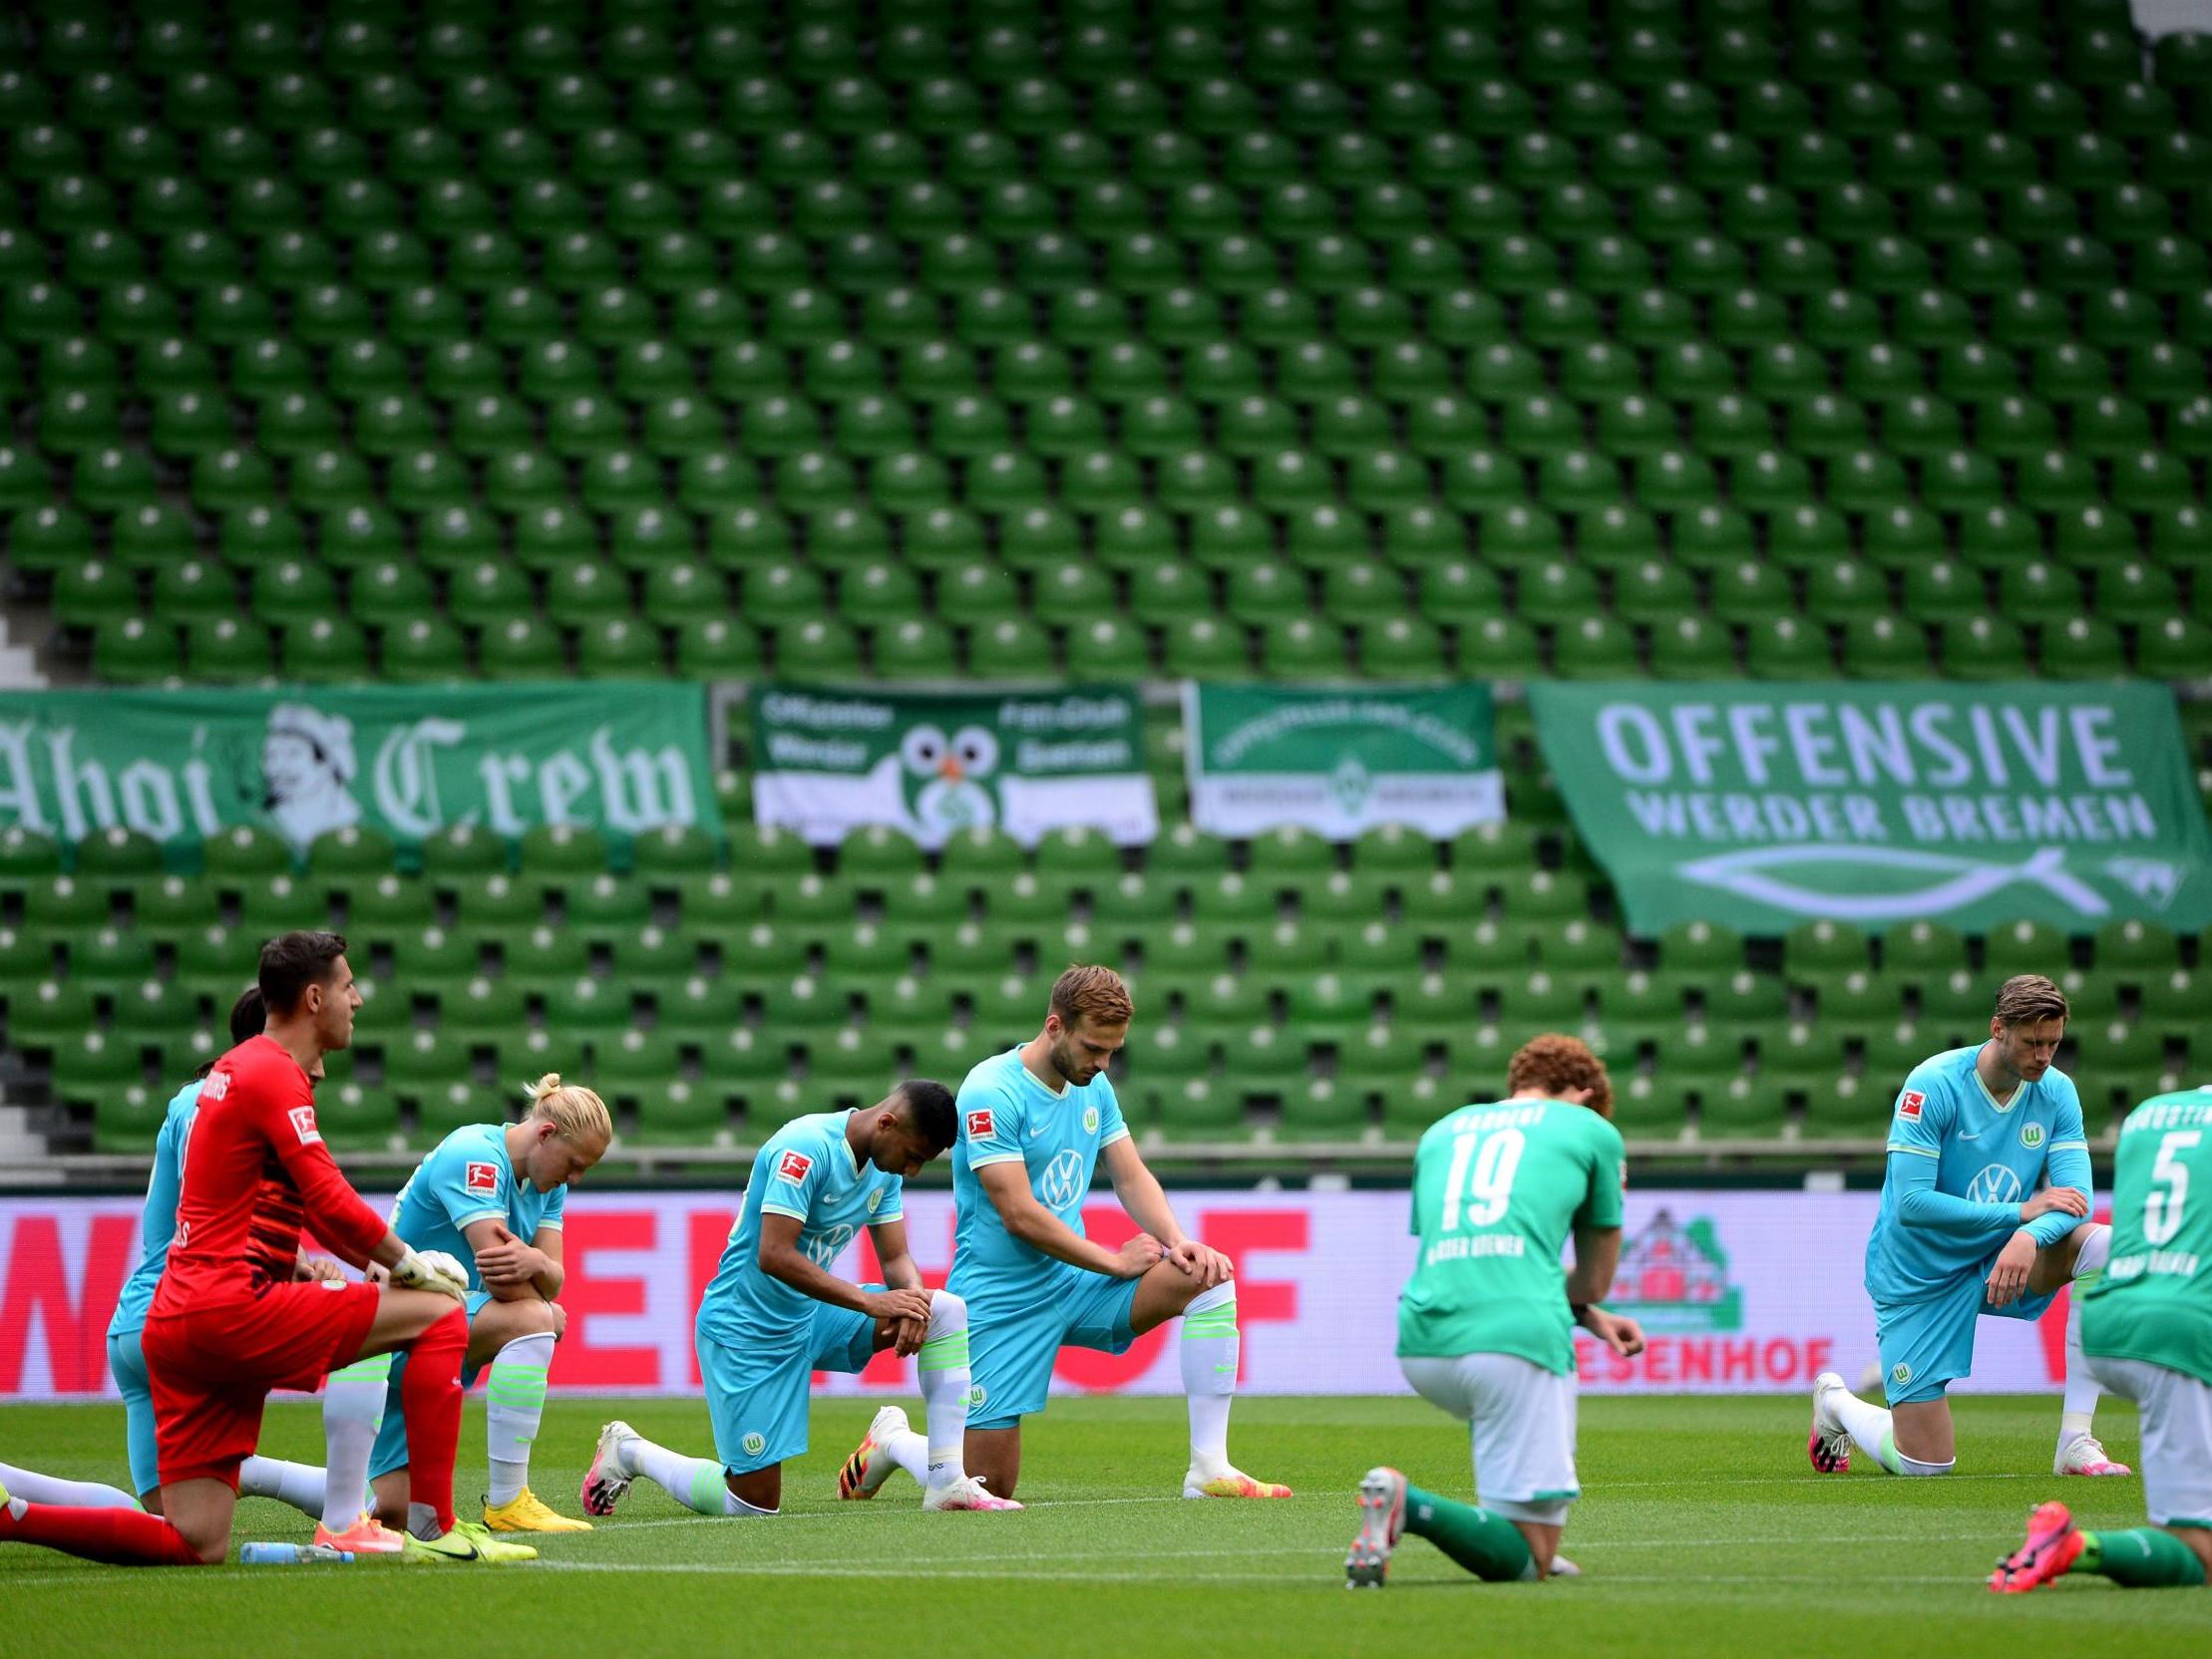 Bundesliga players have been taking a knee since the season resumed